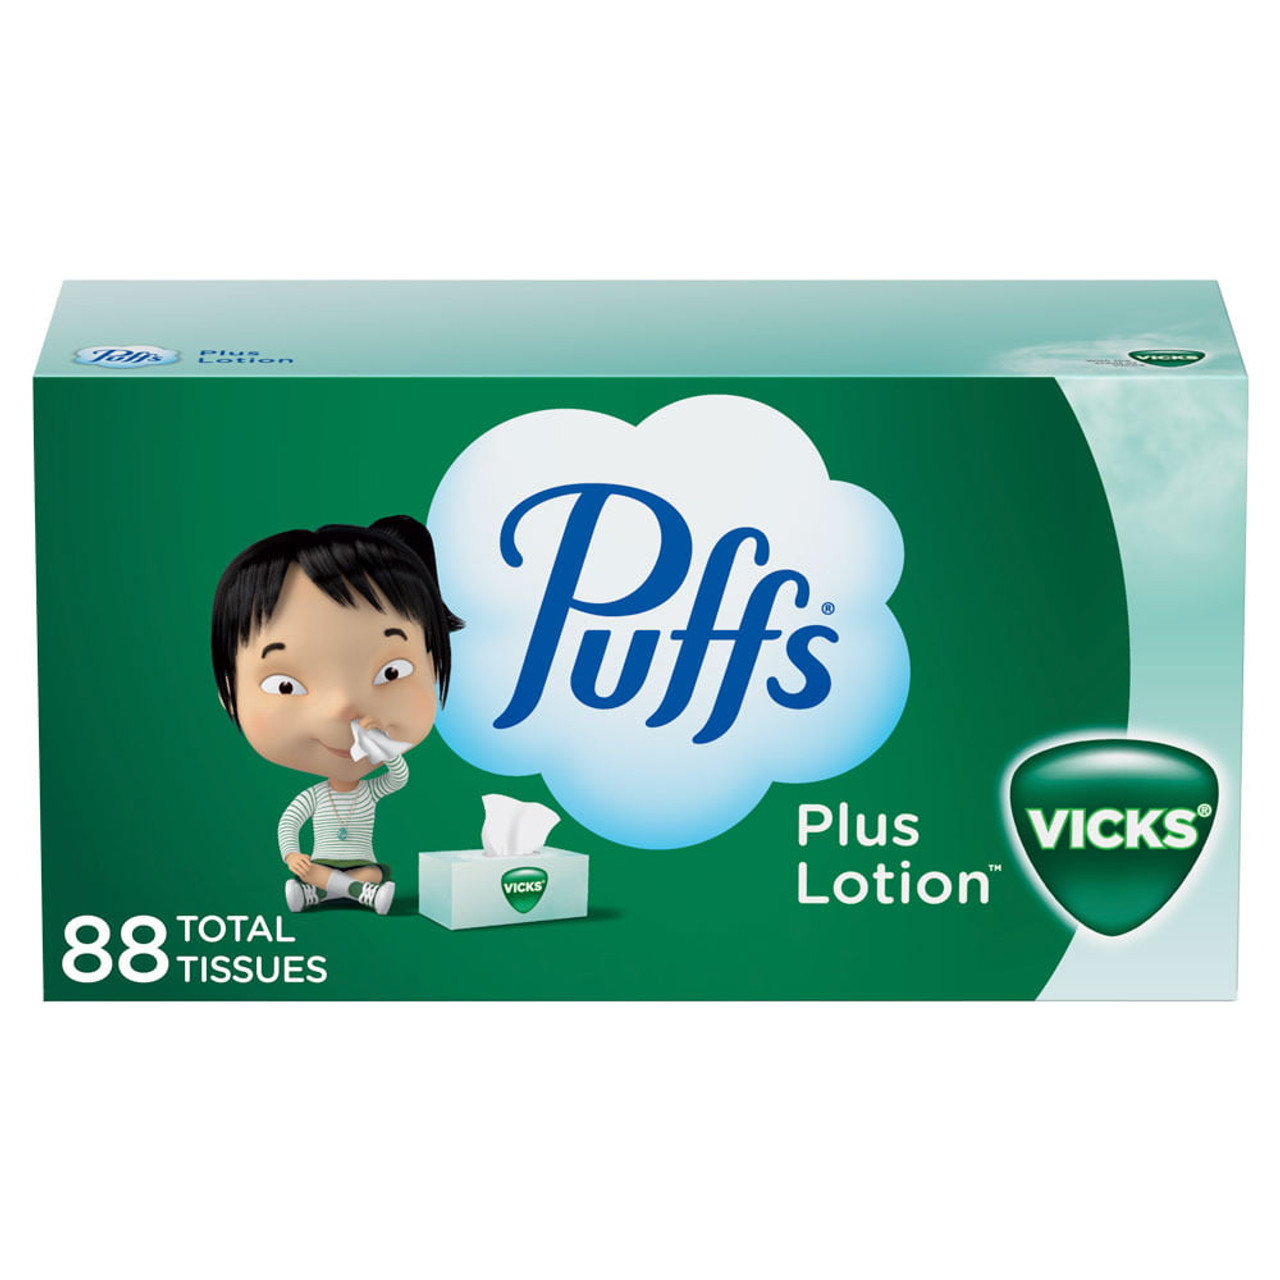 Puffs Plus Lotion Facial Tissues With The Scent Of Vicks, 88 Ea, 24 Pack